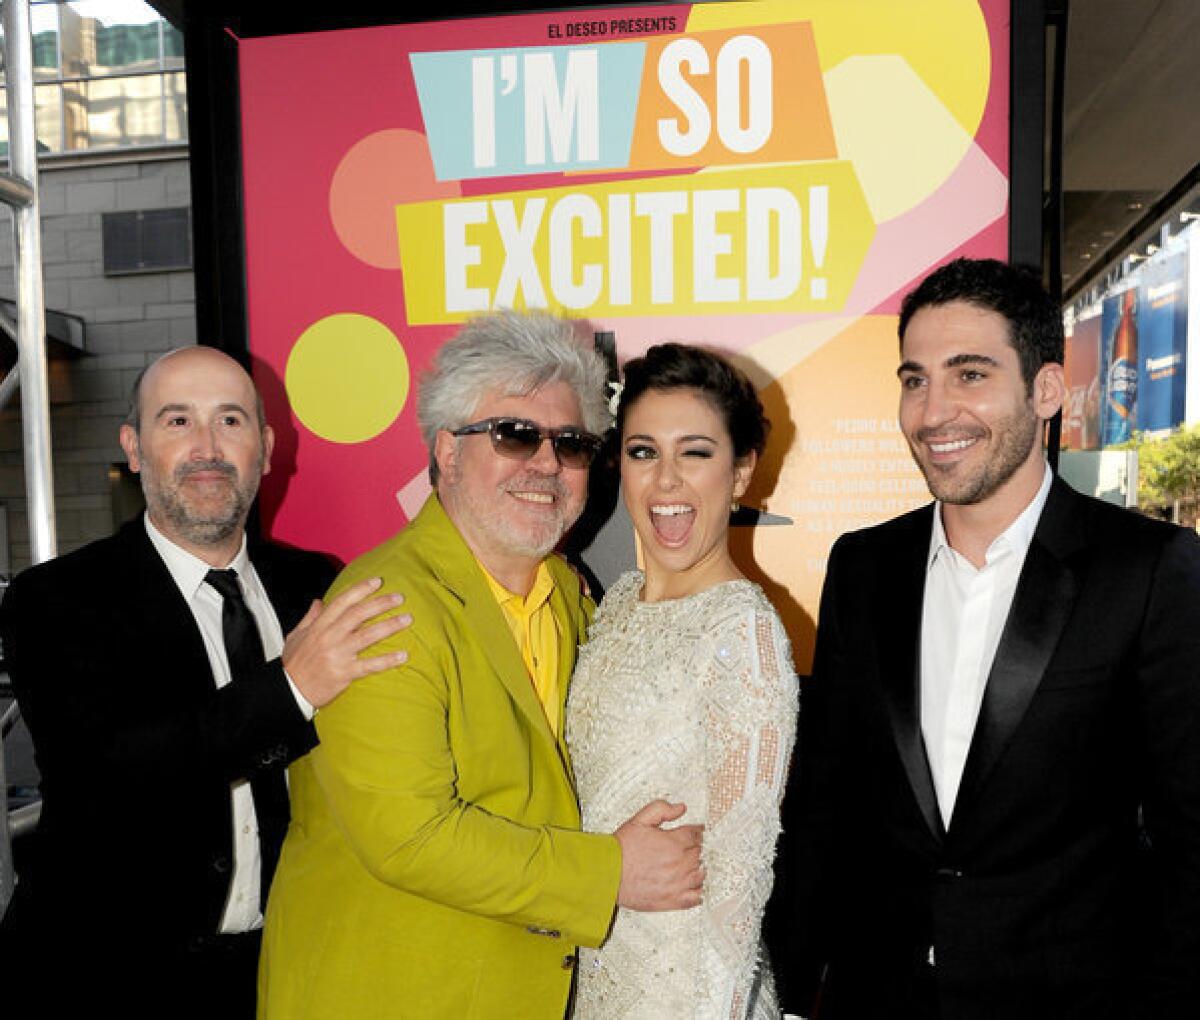 Actor Javier Camara, left, director Pedro Almodovar, actors Blanca Suarez and Miguel Angel Silvestre arrive at the North American premiere of "I'm So Excited!" during the 2013 Los Angeles Film Festival.